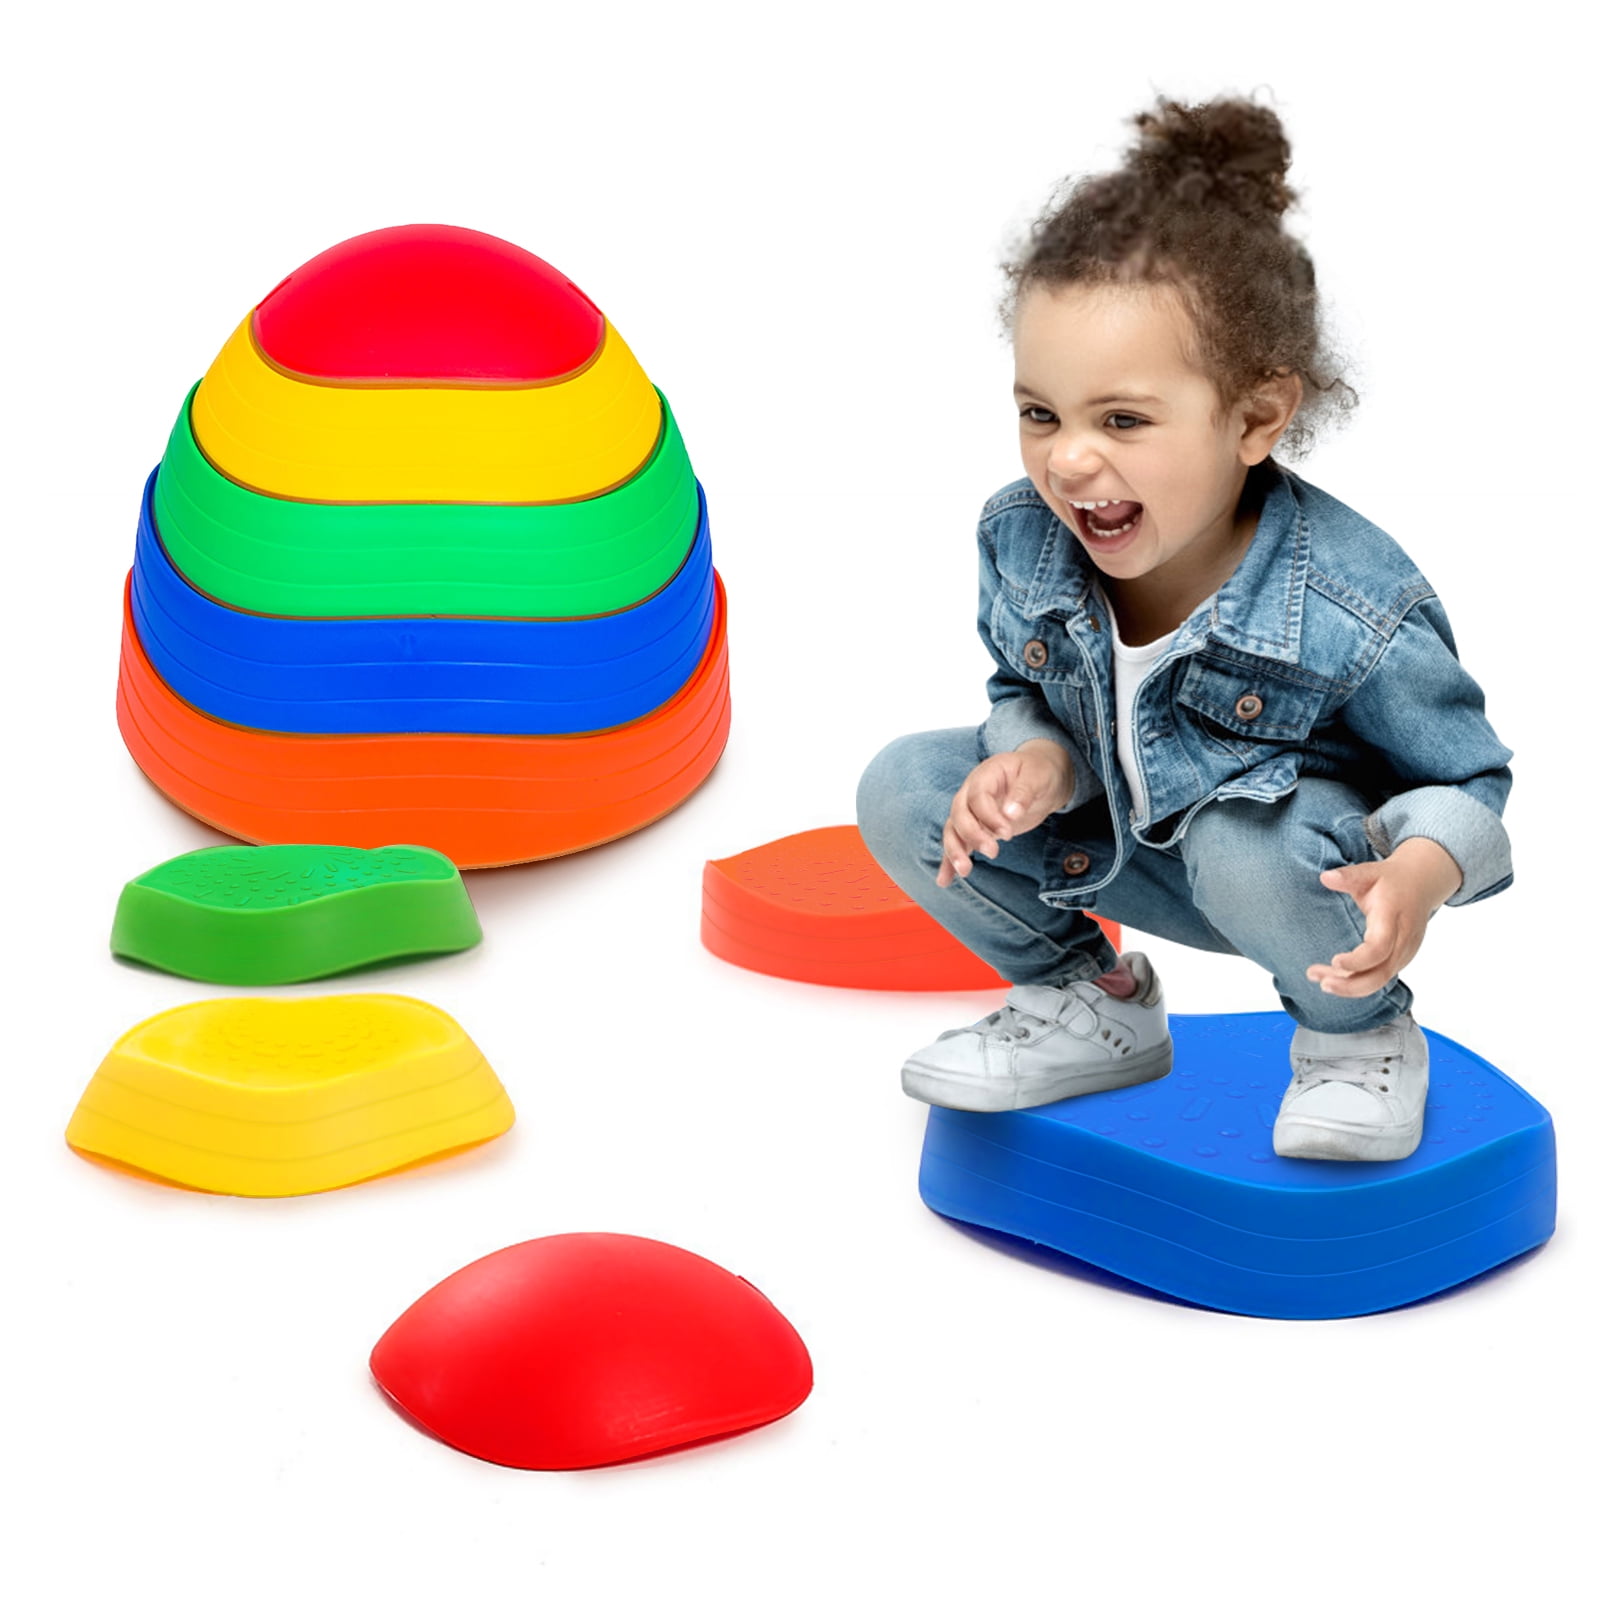 Stepping Stones for Kids Balance Non-Slip 6 Pcs Stepping Rocks & Coordination Enhanced Safety Foot Grips Indoor Outdoor Play Equipment 